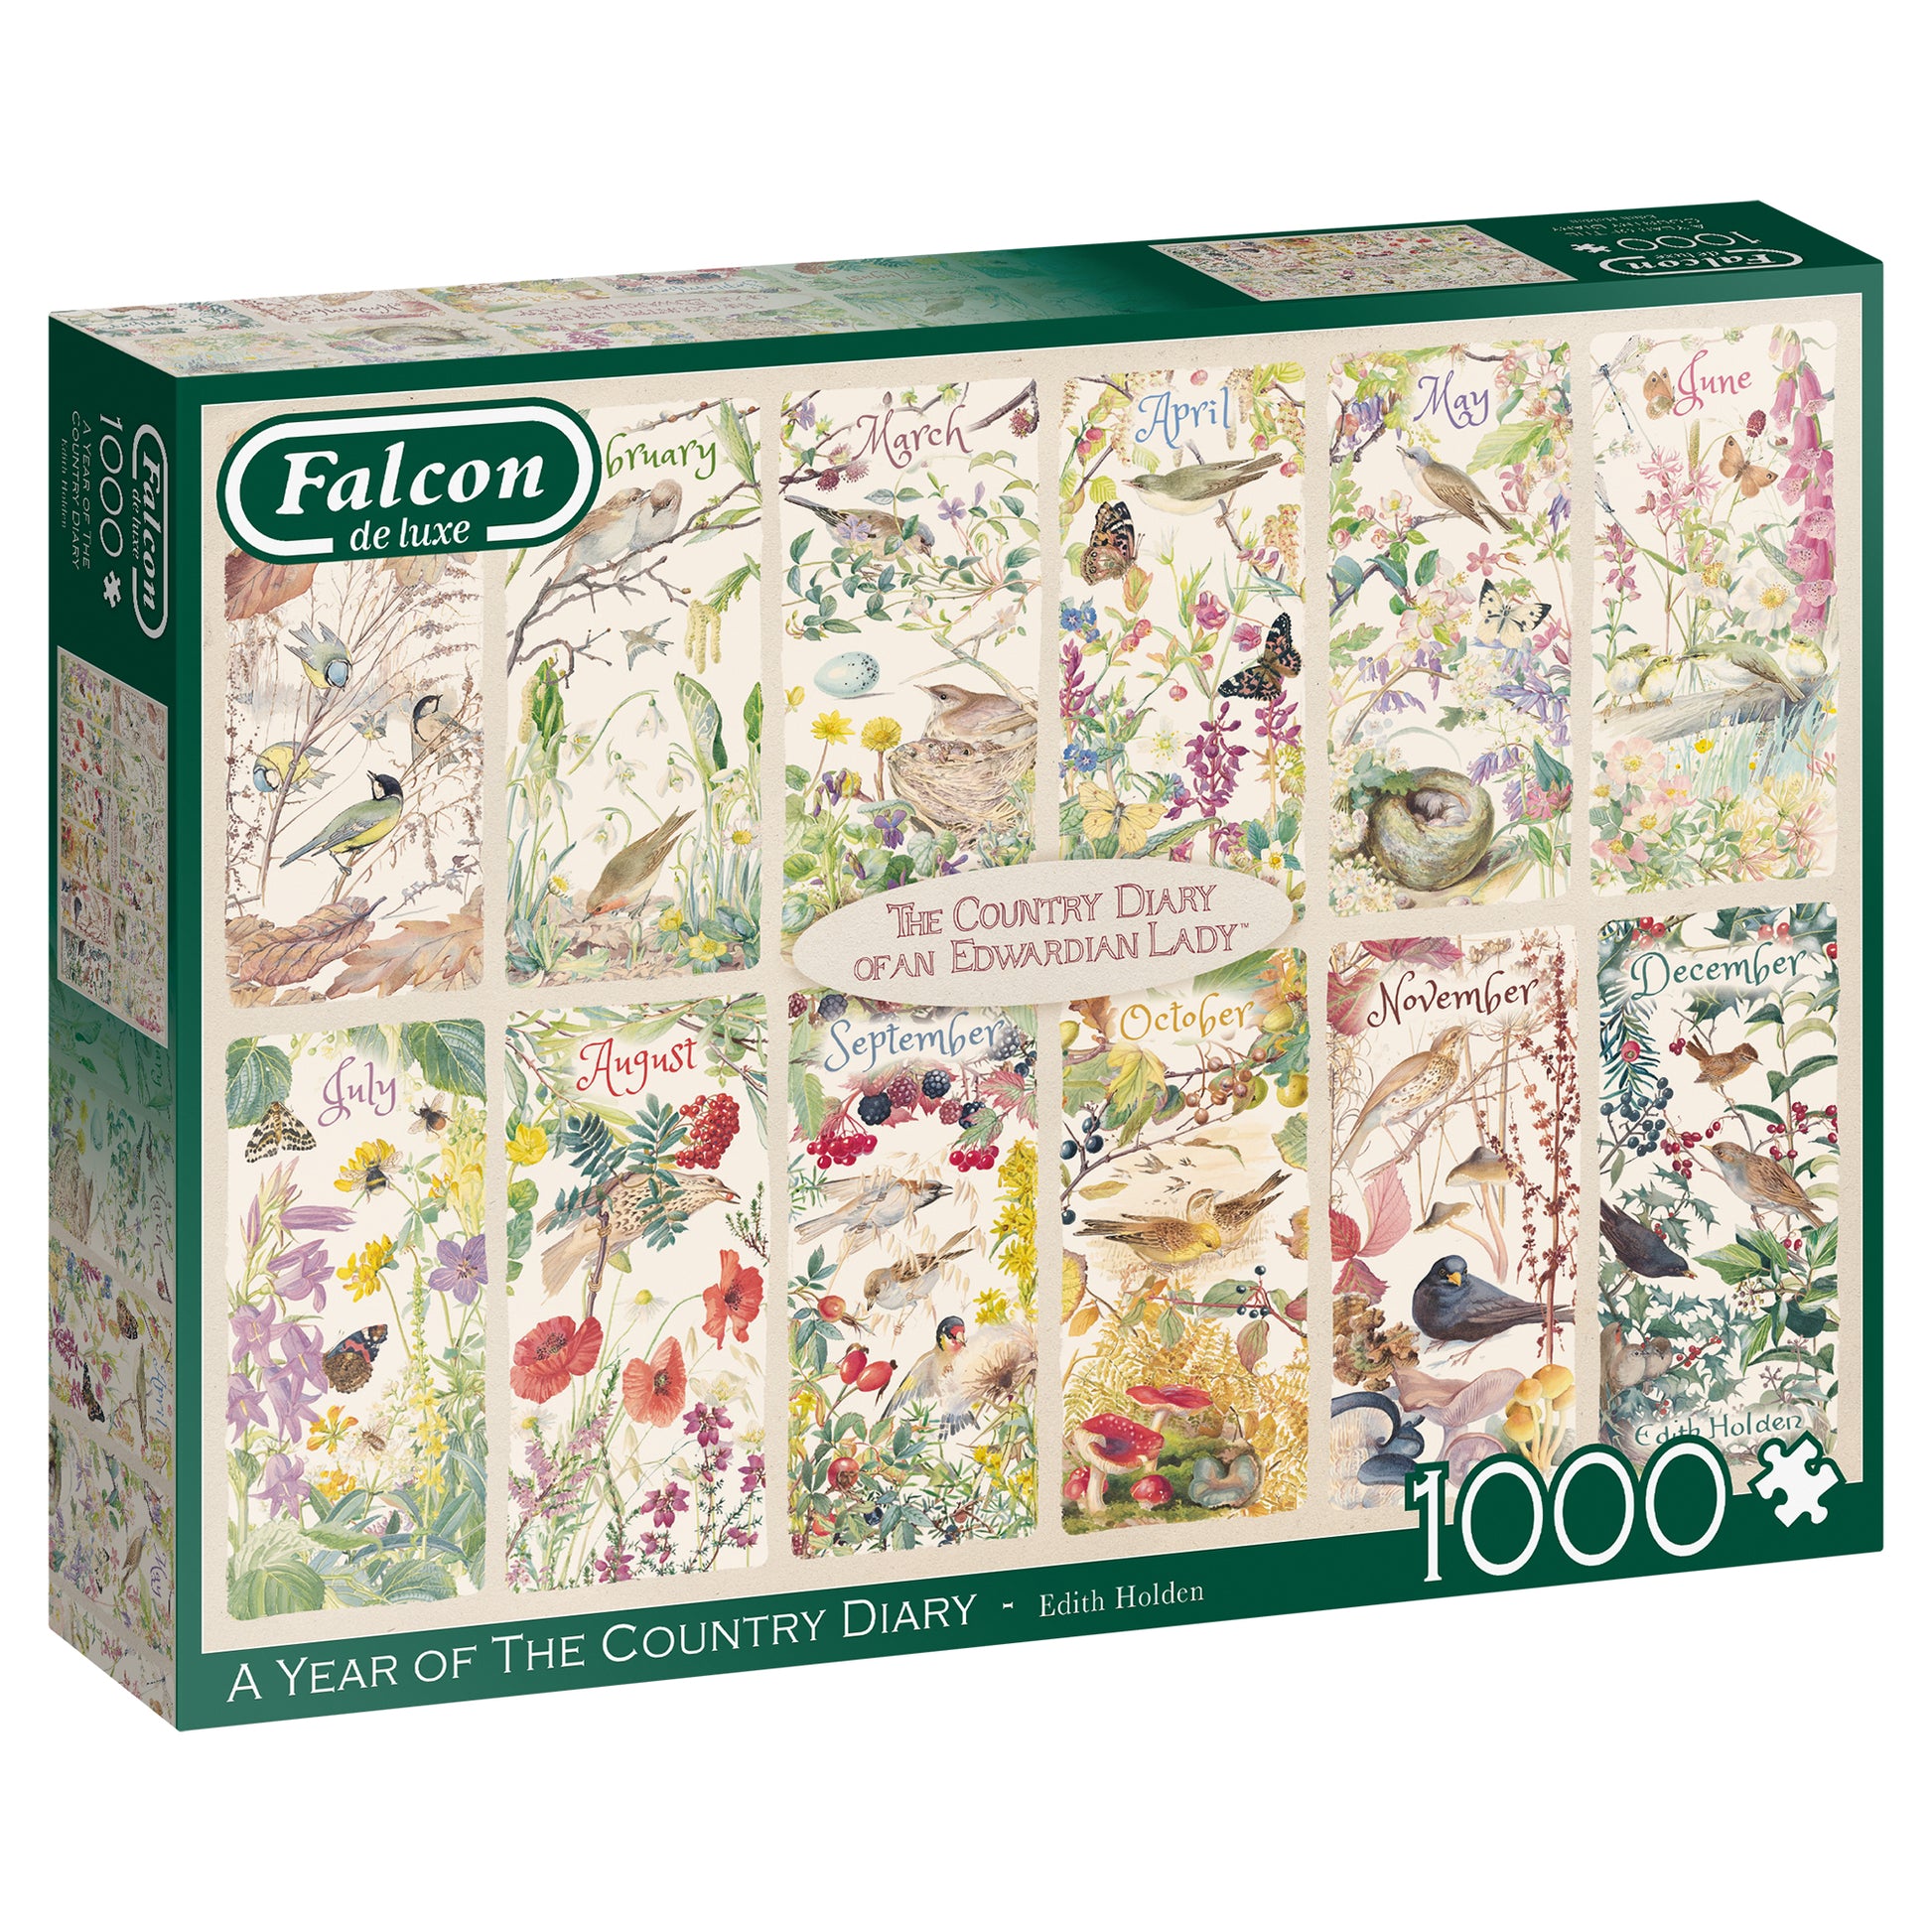 Falcon - A Year of The Country Diary (1000 pieces) - product image - Jumboplay.com